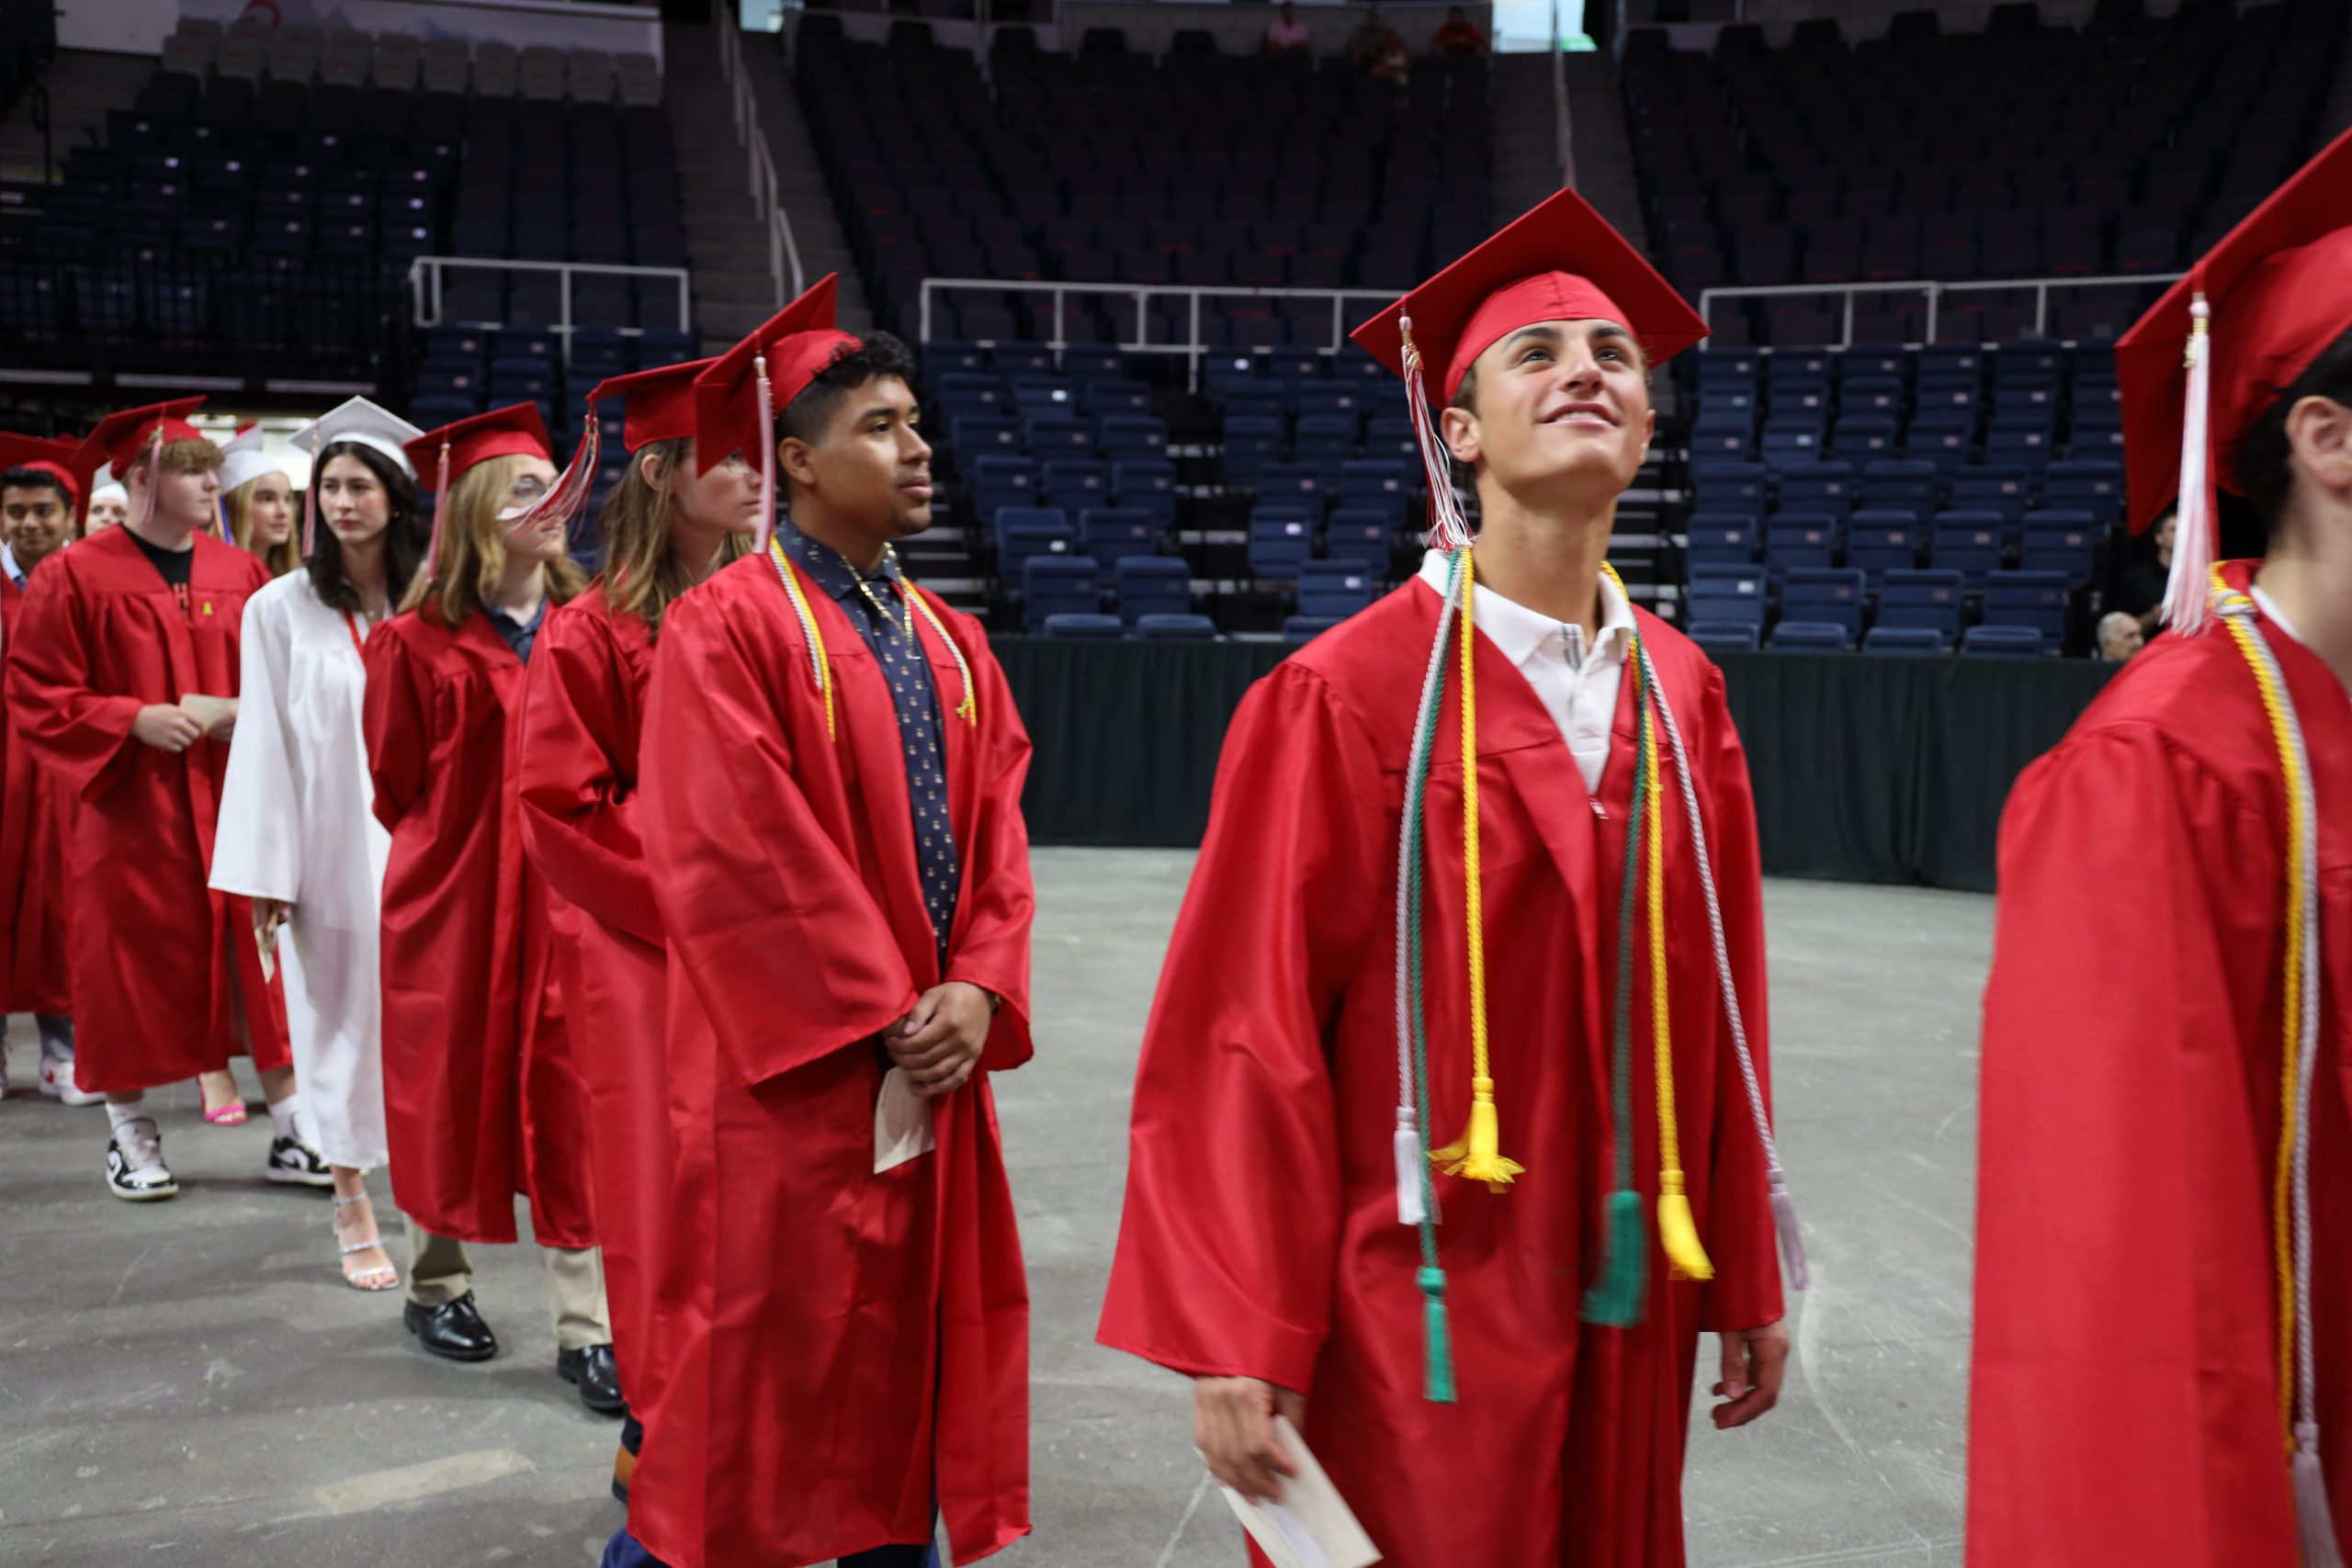 Graduates walking in to the arena. The first graduate is looking up as he walks in. Most of the graduates are wearing red caps and gowns, while one student in the very back of the photo is wearing a white cap and gown.